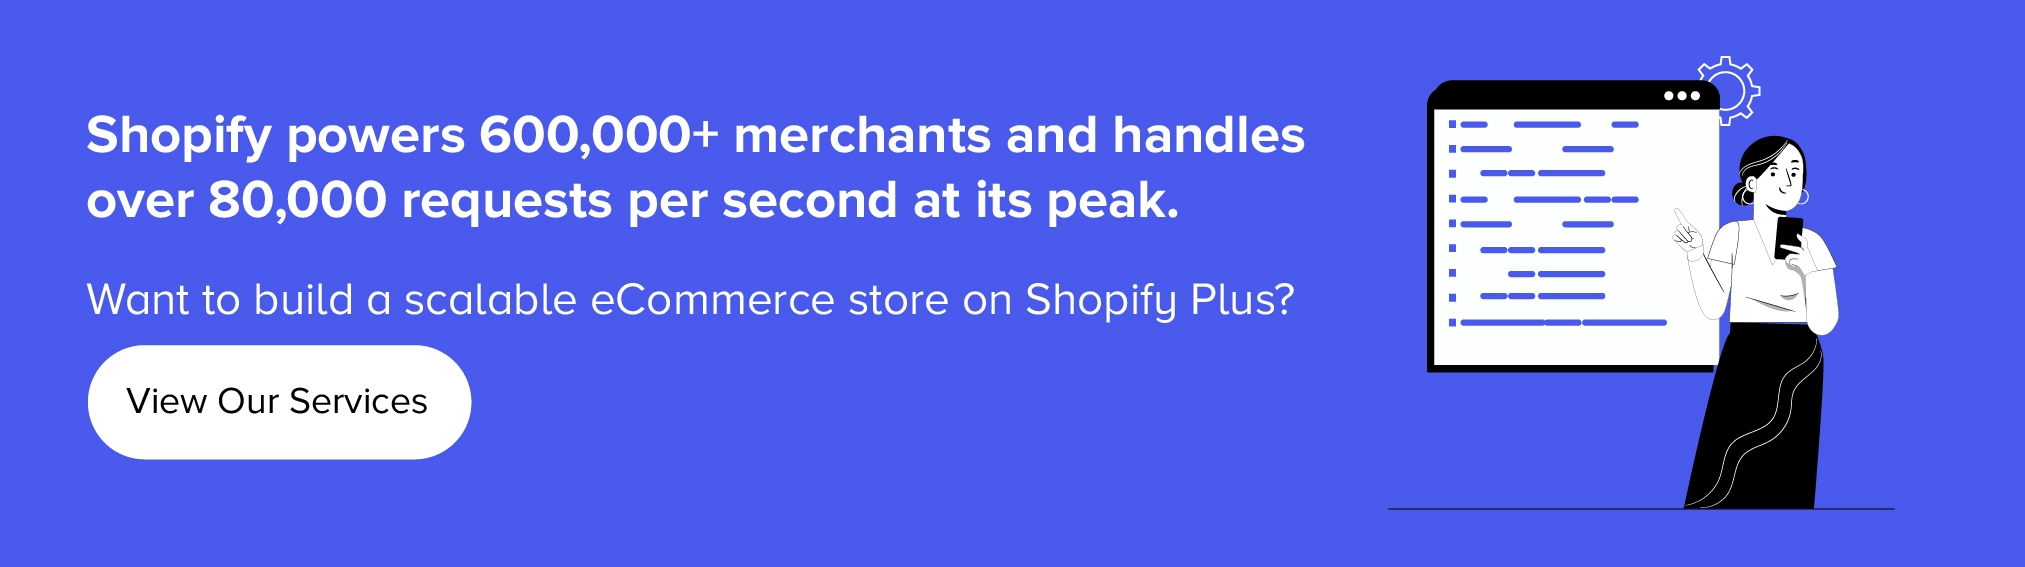 Get service assistance to build an eCommerce website on Shopify Plus